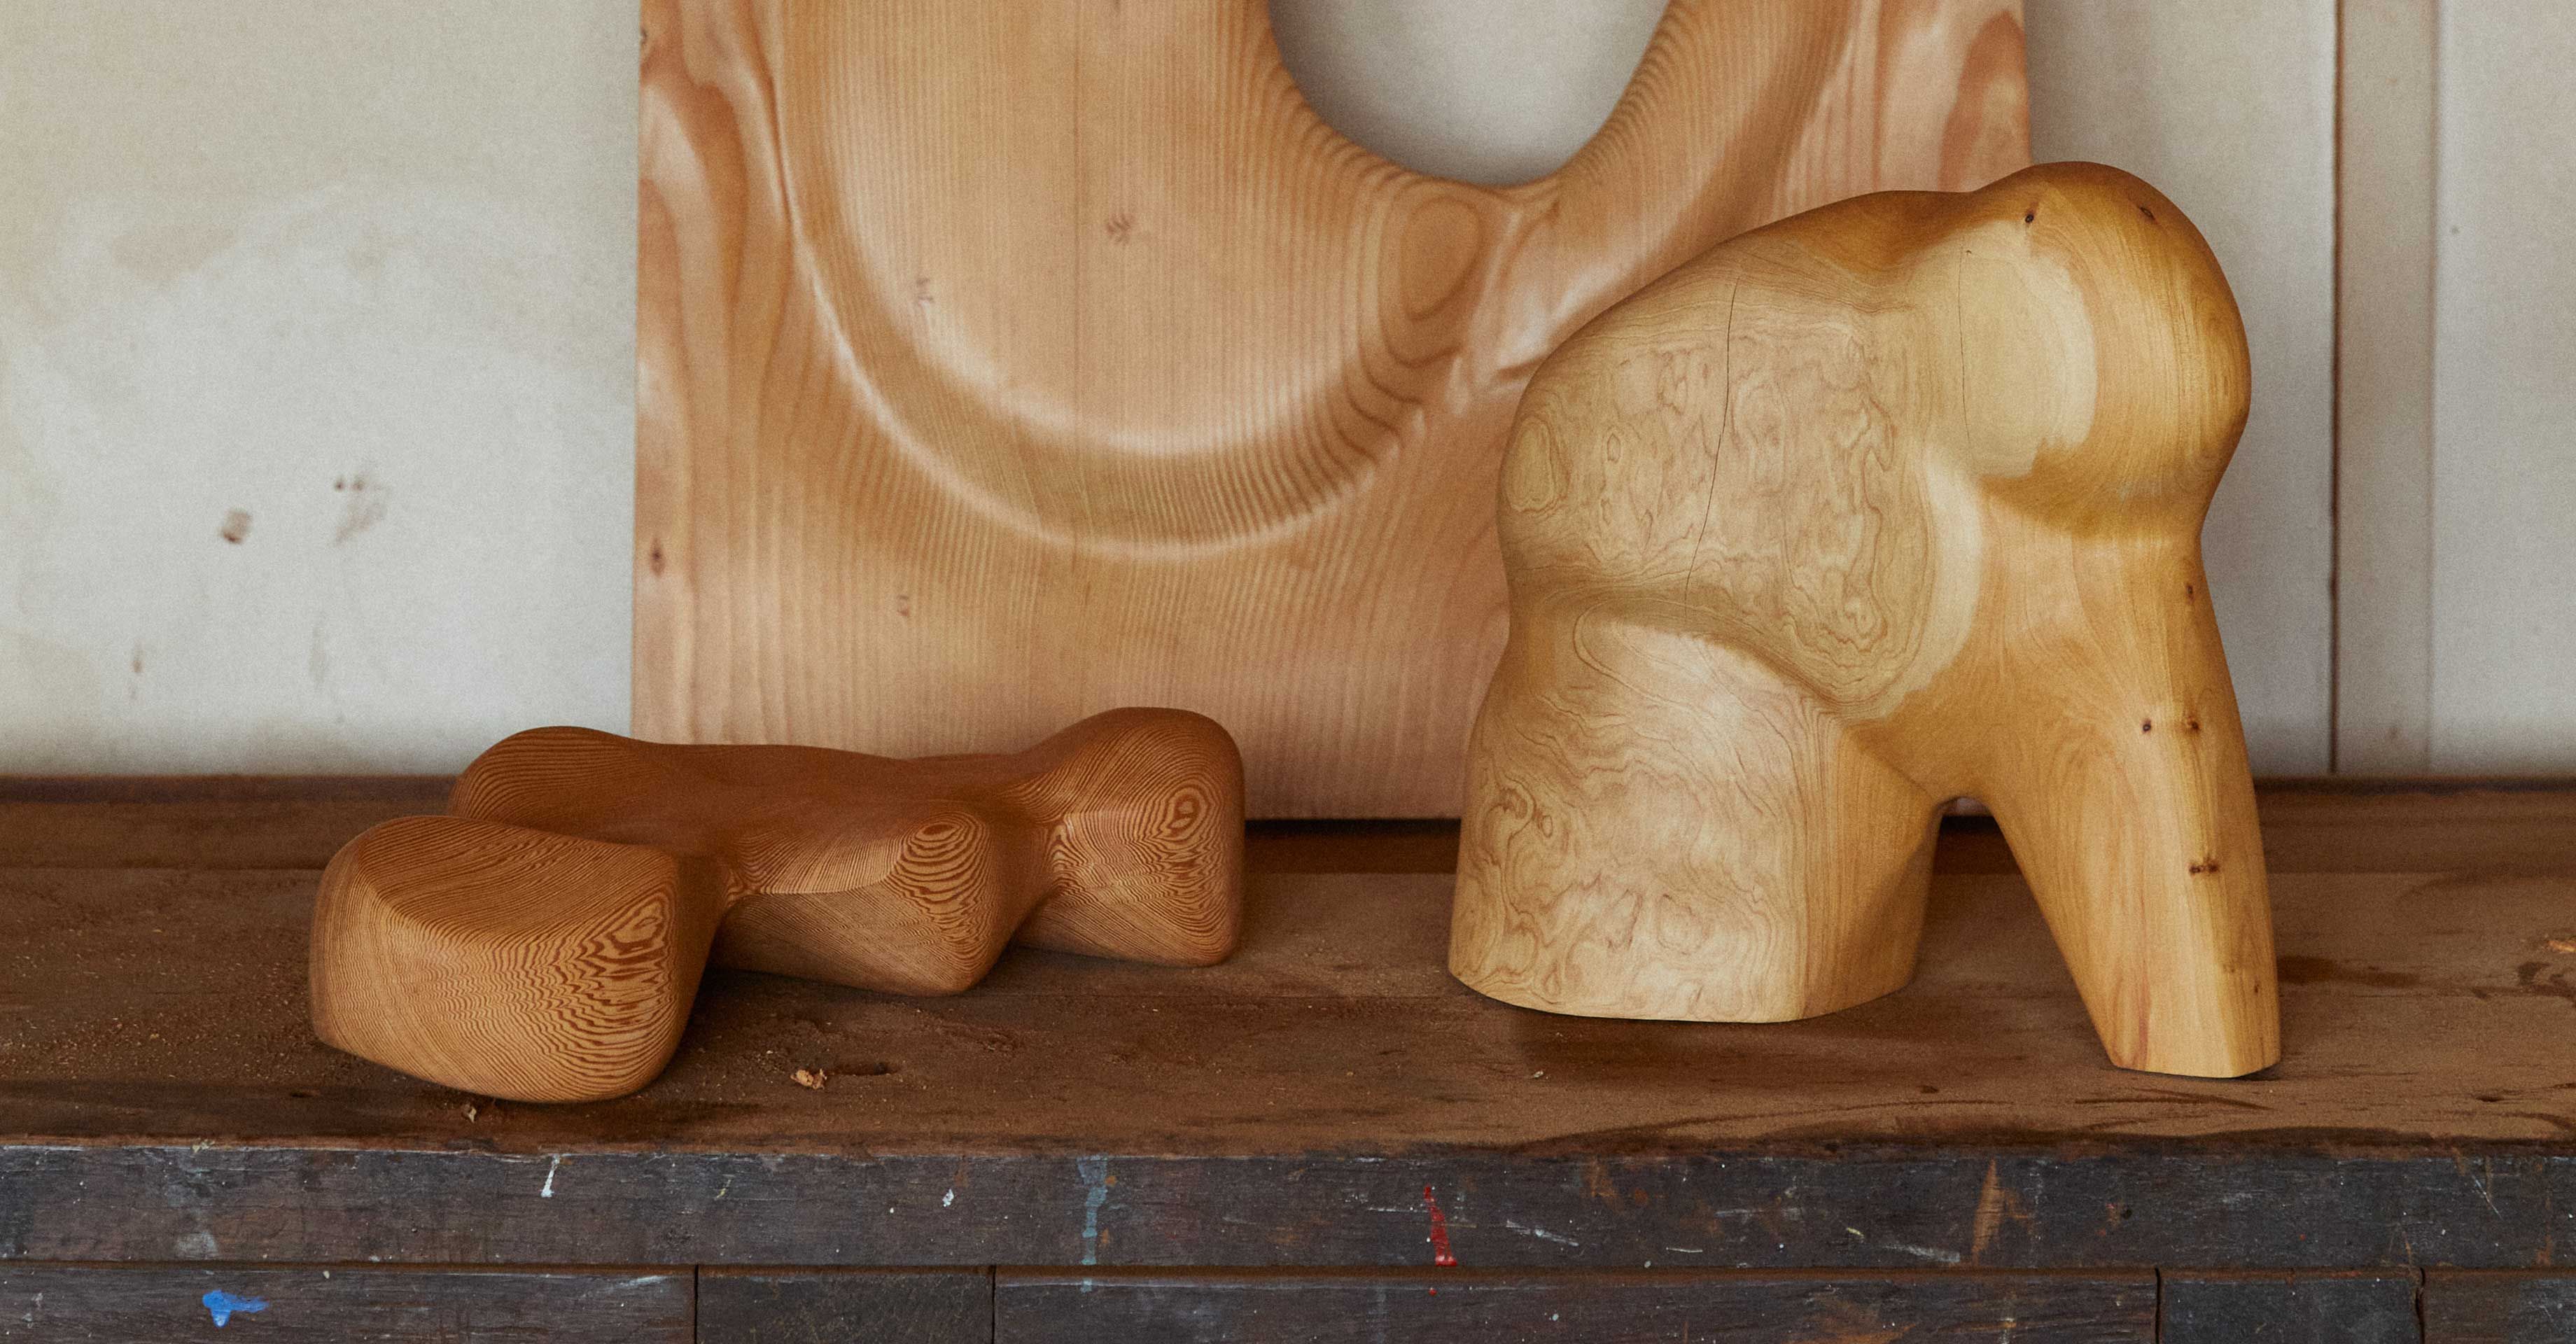 These Wooden Sculptures Oscillate Gracefully Between Function and Form